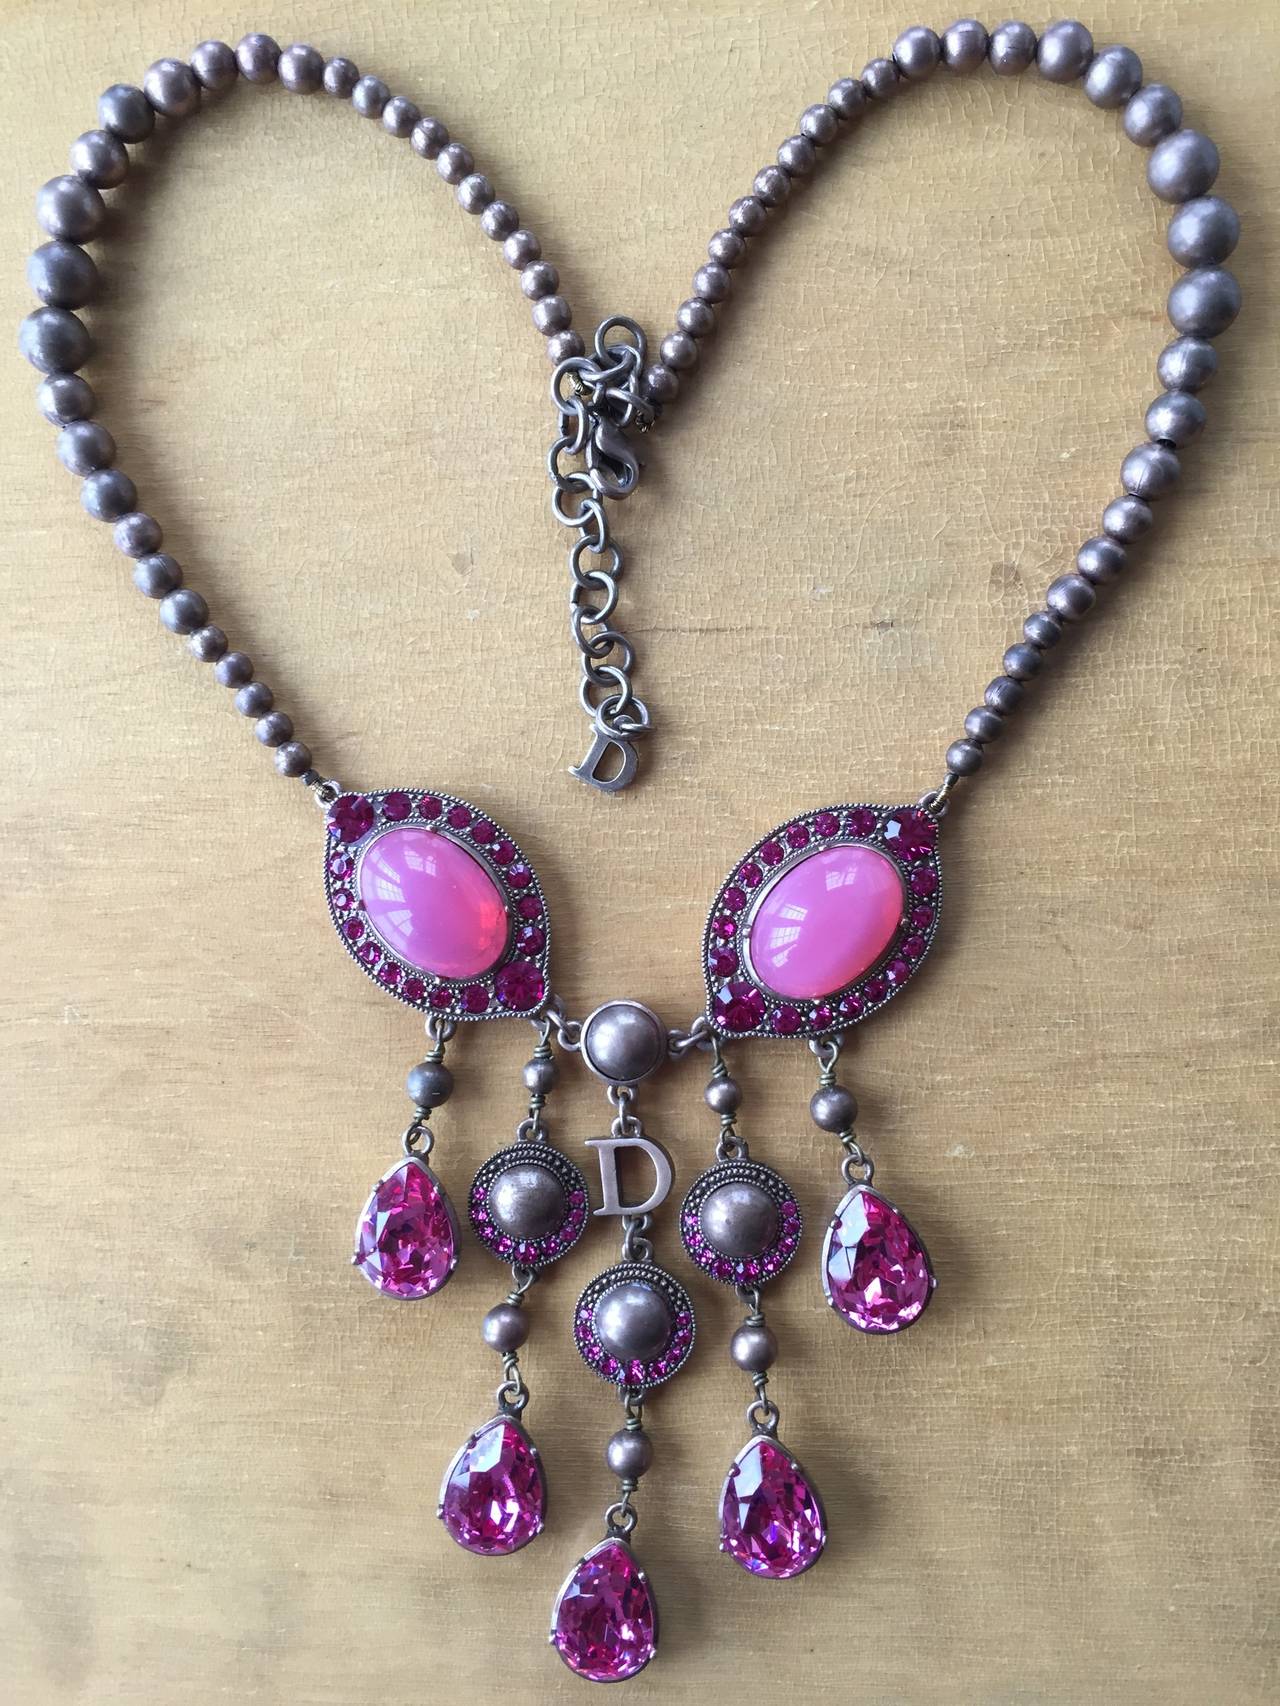 Beautiful rose color necklace from Christian Dior.
The metal is an antique brass , Swarovski crystal drops.
16